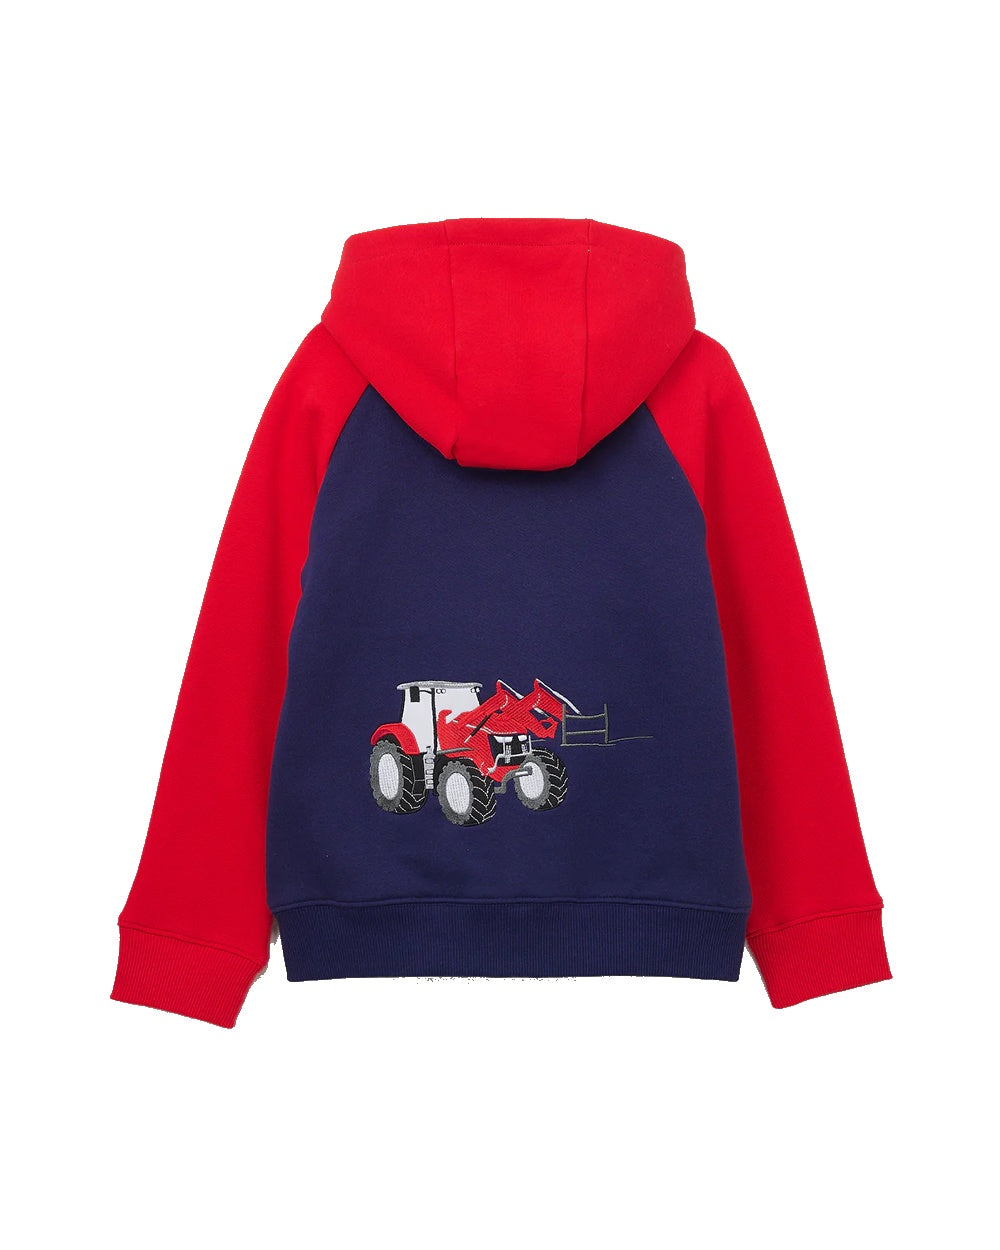 Lighthouse Jackson Full Zip Hoodie in Red Tractor 